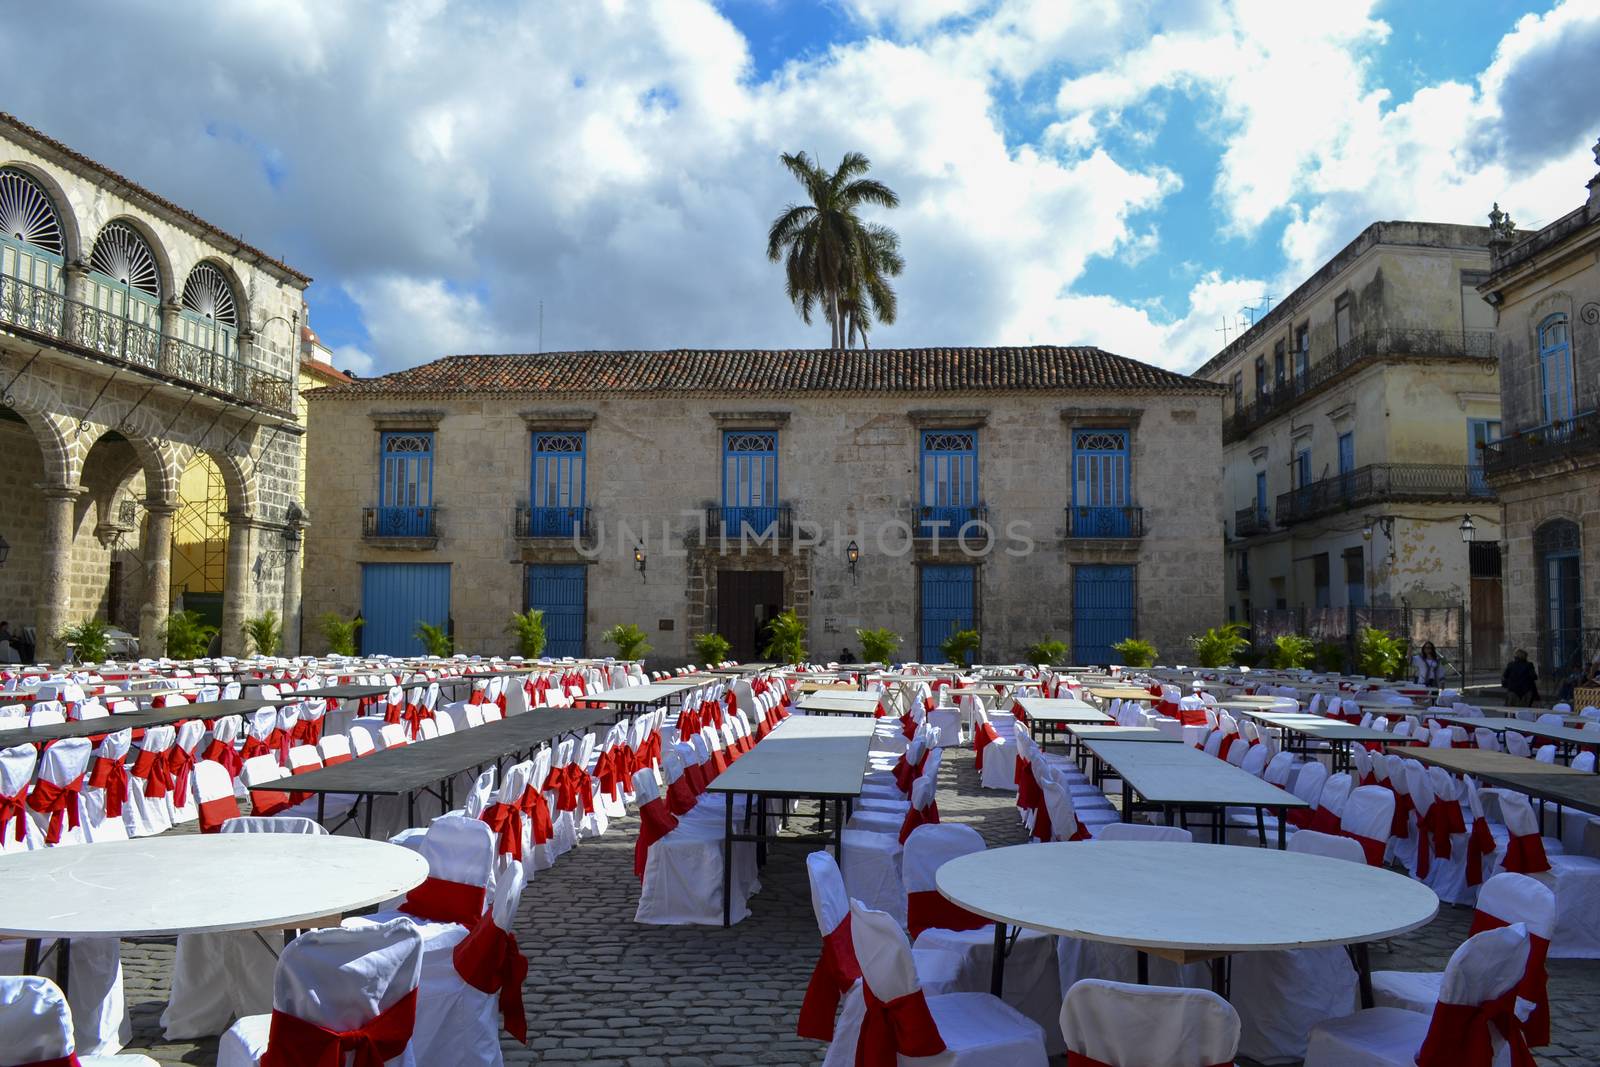 Havana Cuba city square prepared for festivities, empty chairs and tables; ready to receive people by kb79